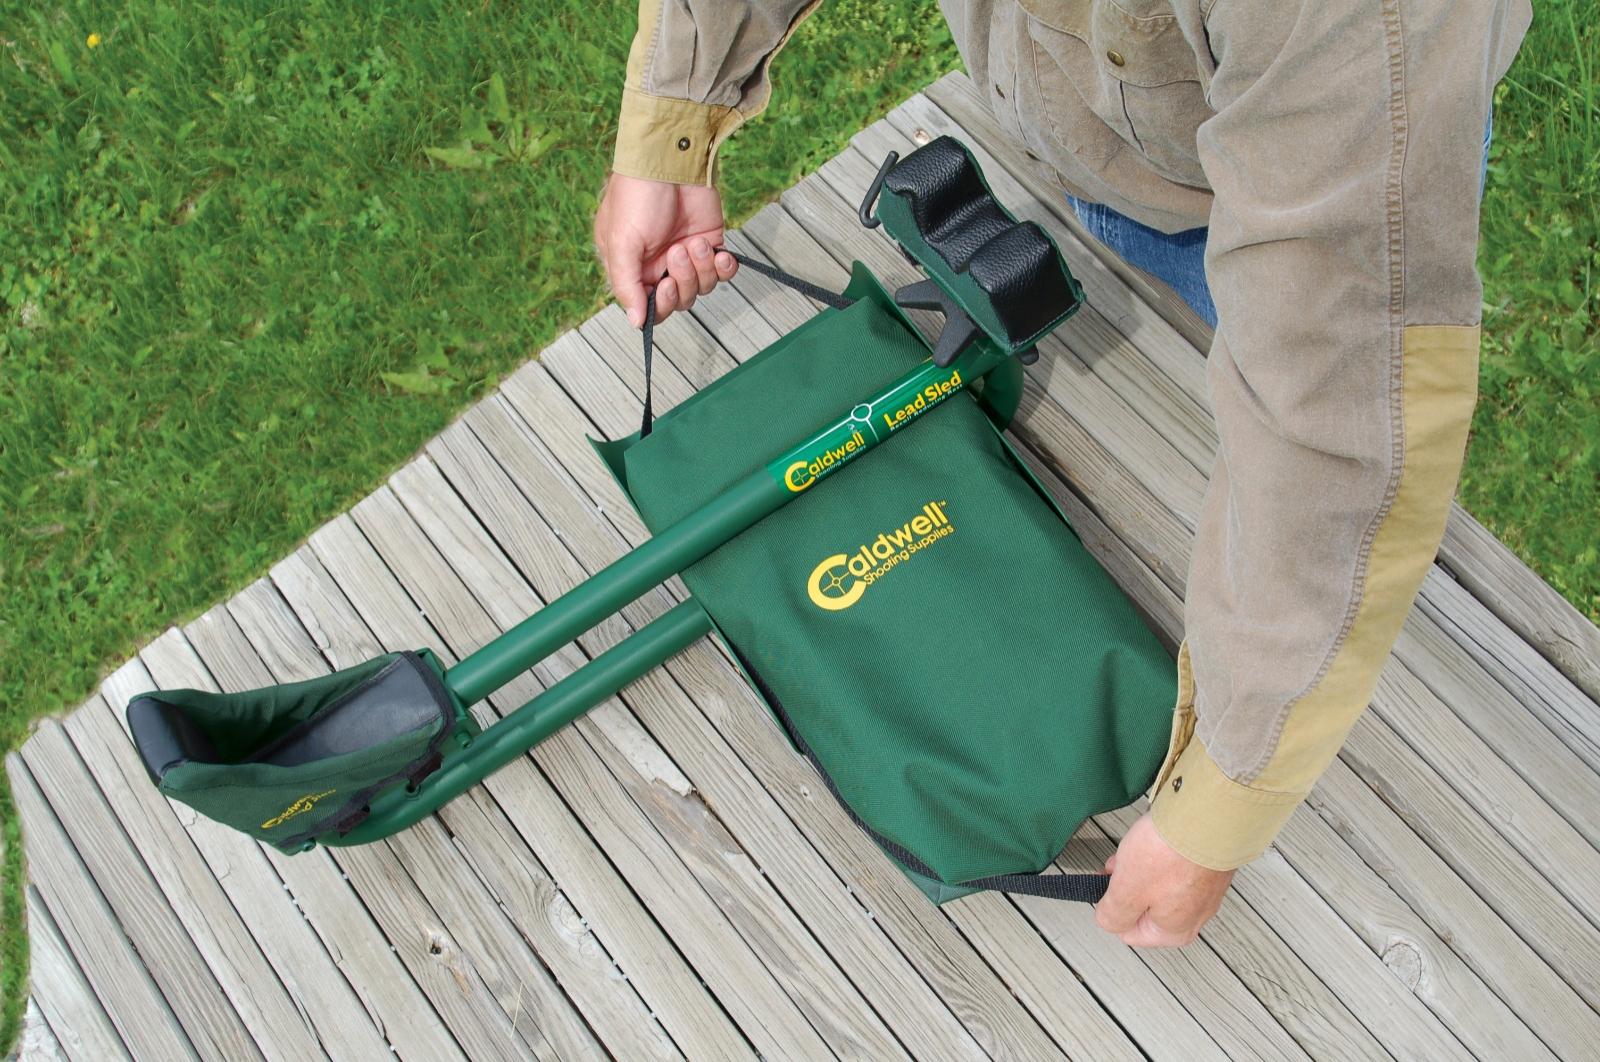 Caldwell Large Lead Sled Weight Bag